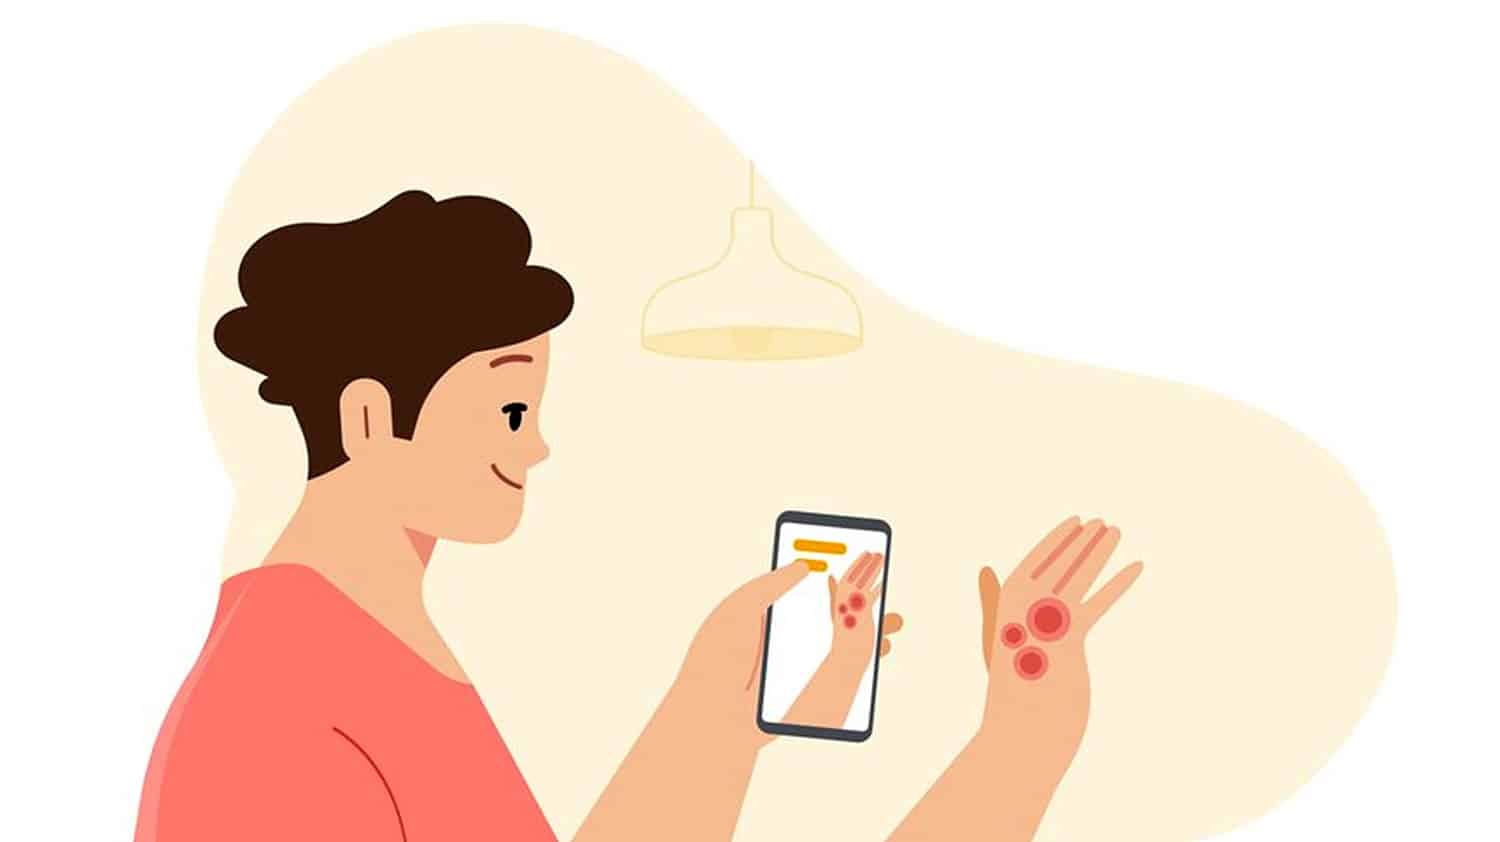 Google's AI-powered dermatology tool helps you diagnose skin conditions.